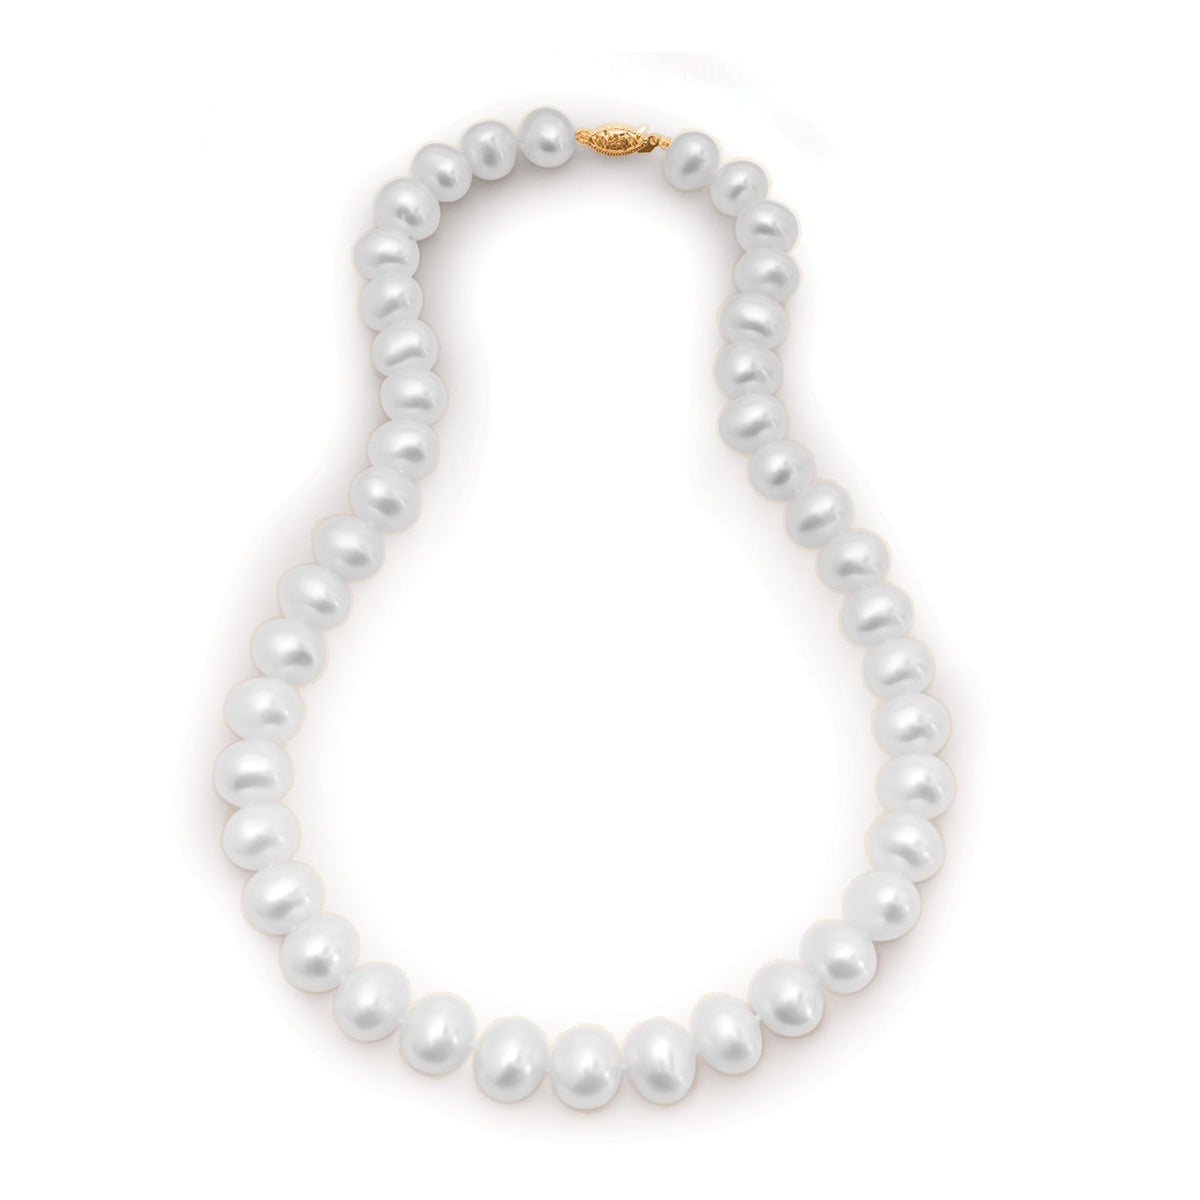 Buy Natural Freshwater Pearls String Maala Necklace,pearl Jewelry,western  Jewelry,beads Jewelry,indian Jewelry, Sabyasachi Jewelry,real Pearl, Online  in India - Etsy